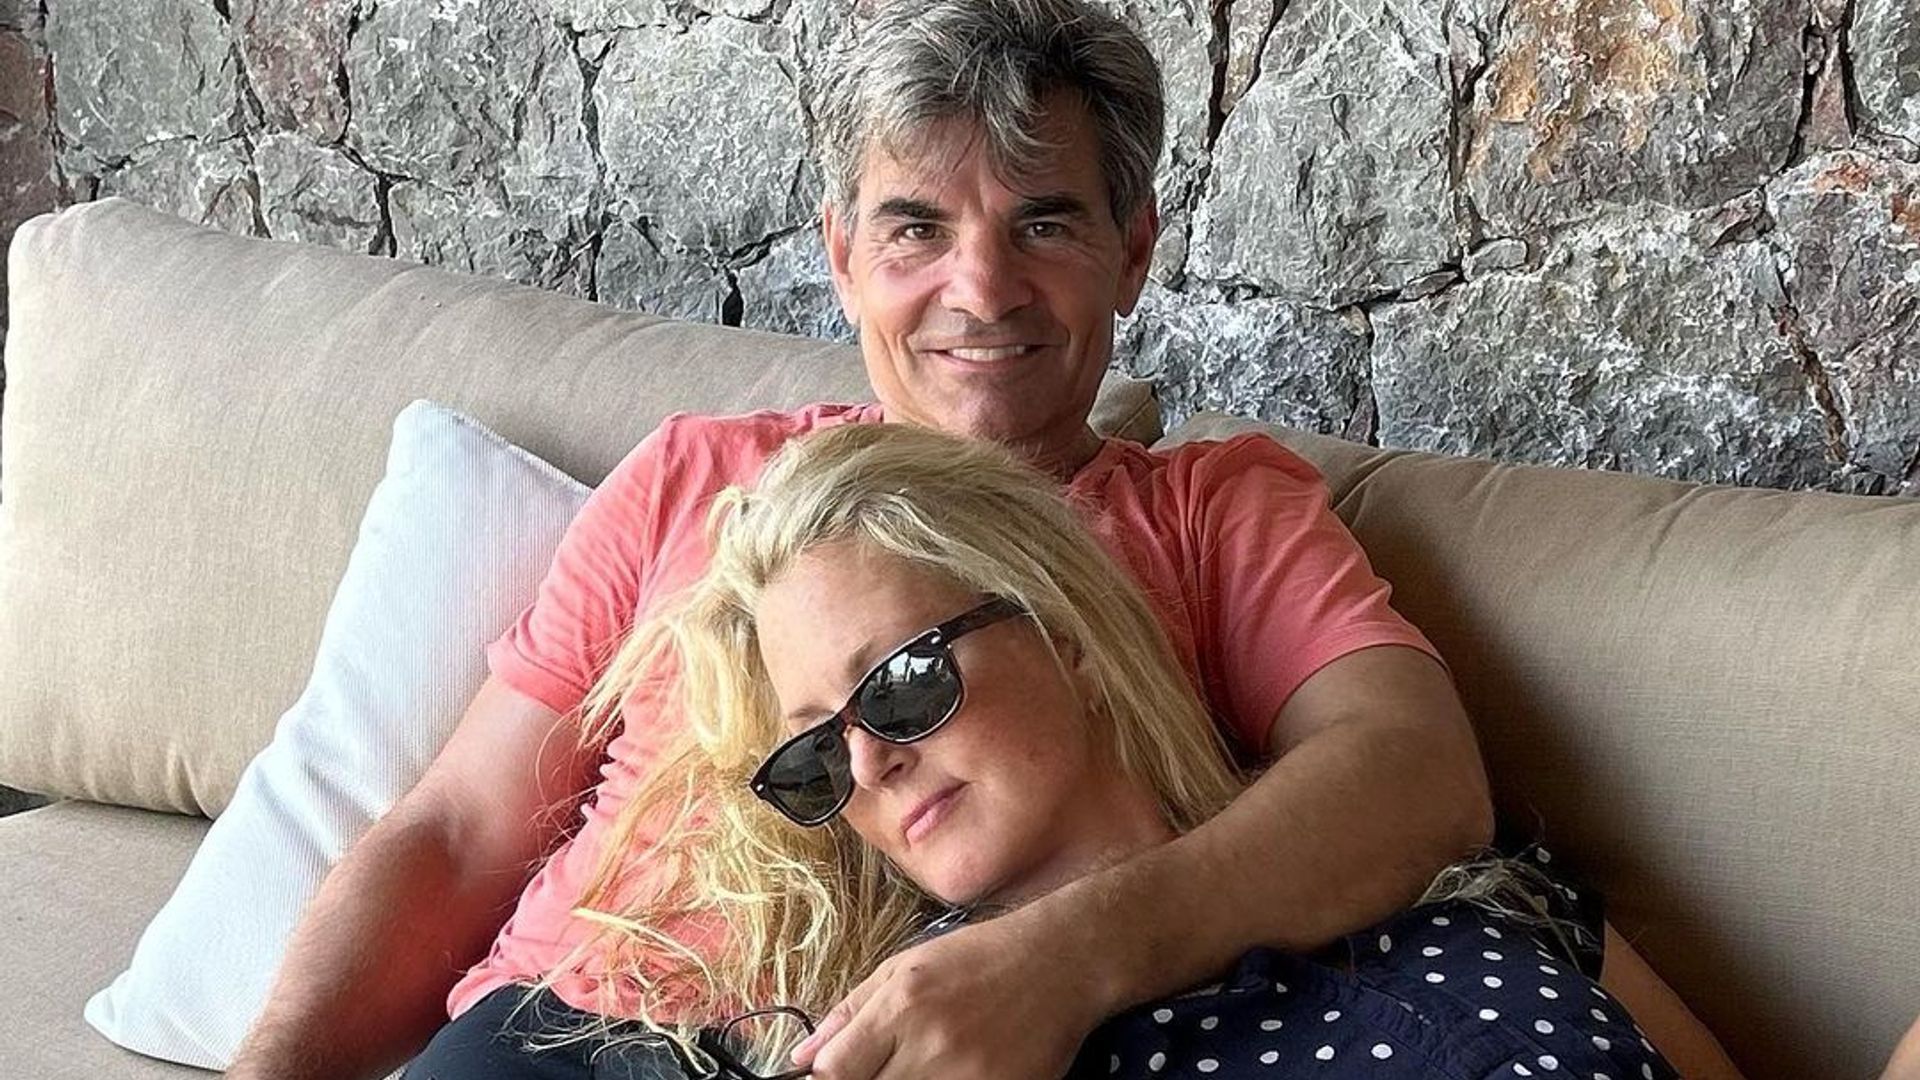 George Stephanopoulos and Ali Wentworth on vacation in Greece